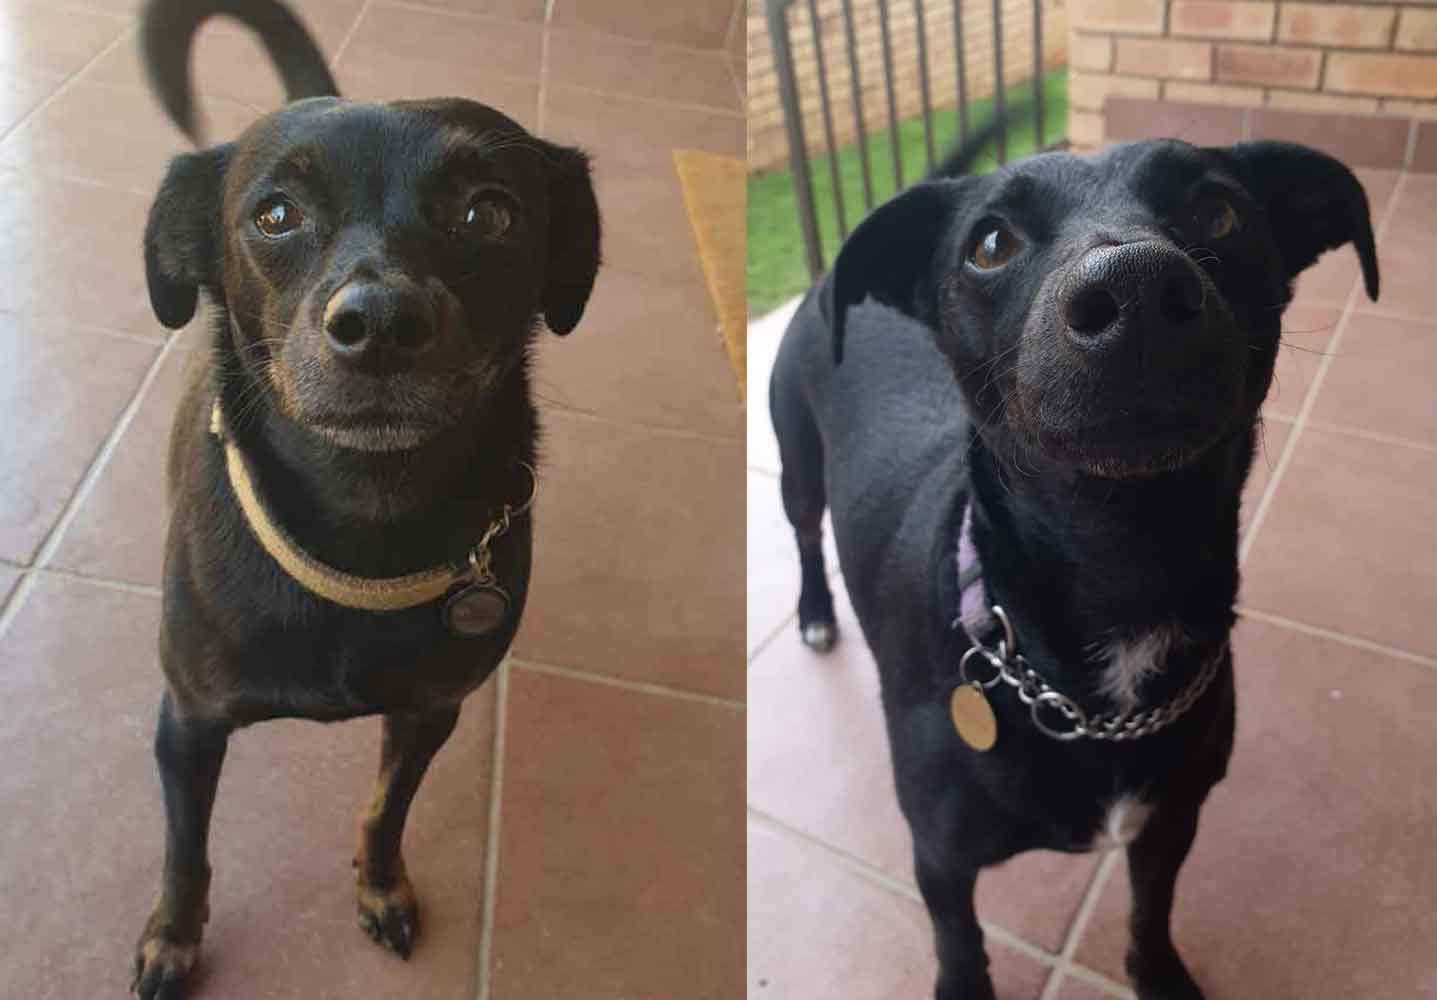 Adopt a Chipin, Harley & Harper are small female dogs, excitedly waiting for a new family to adopt them.